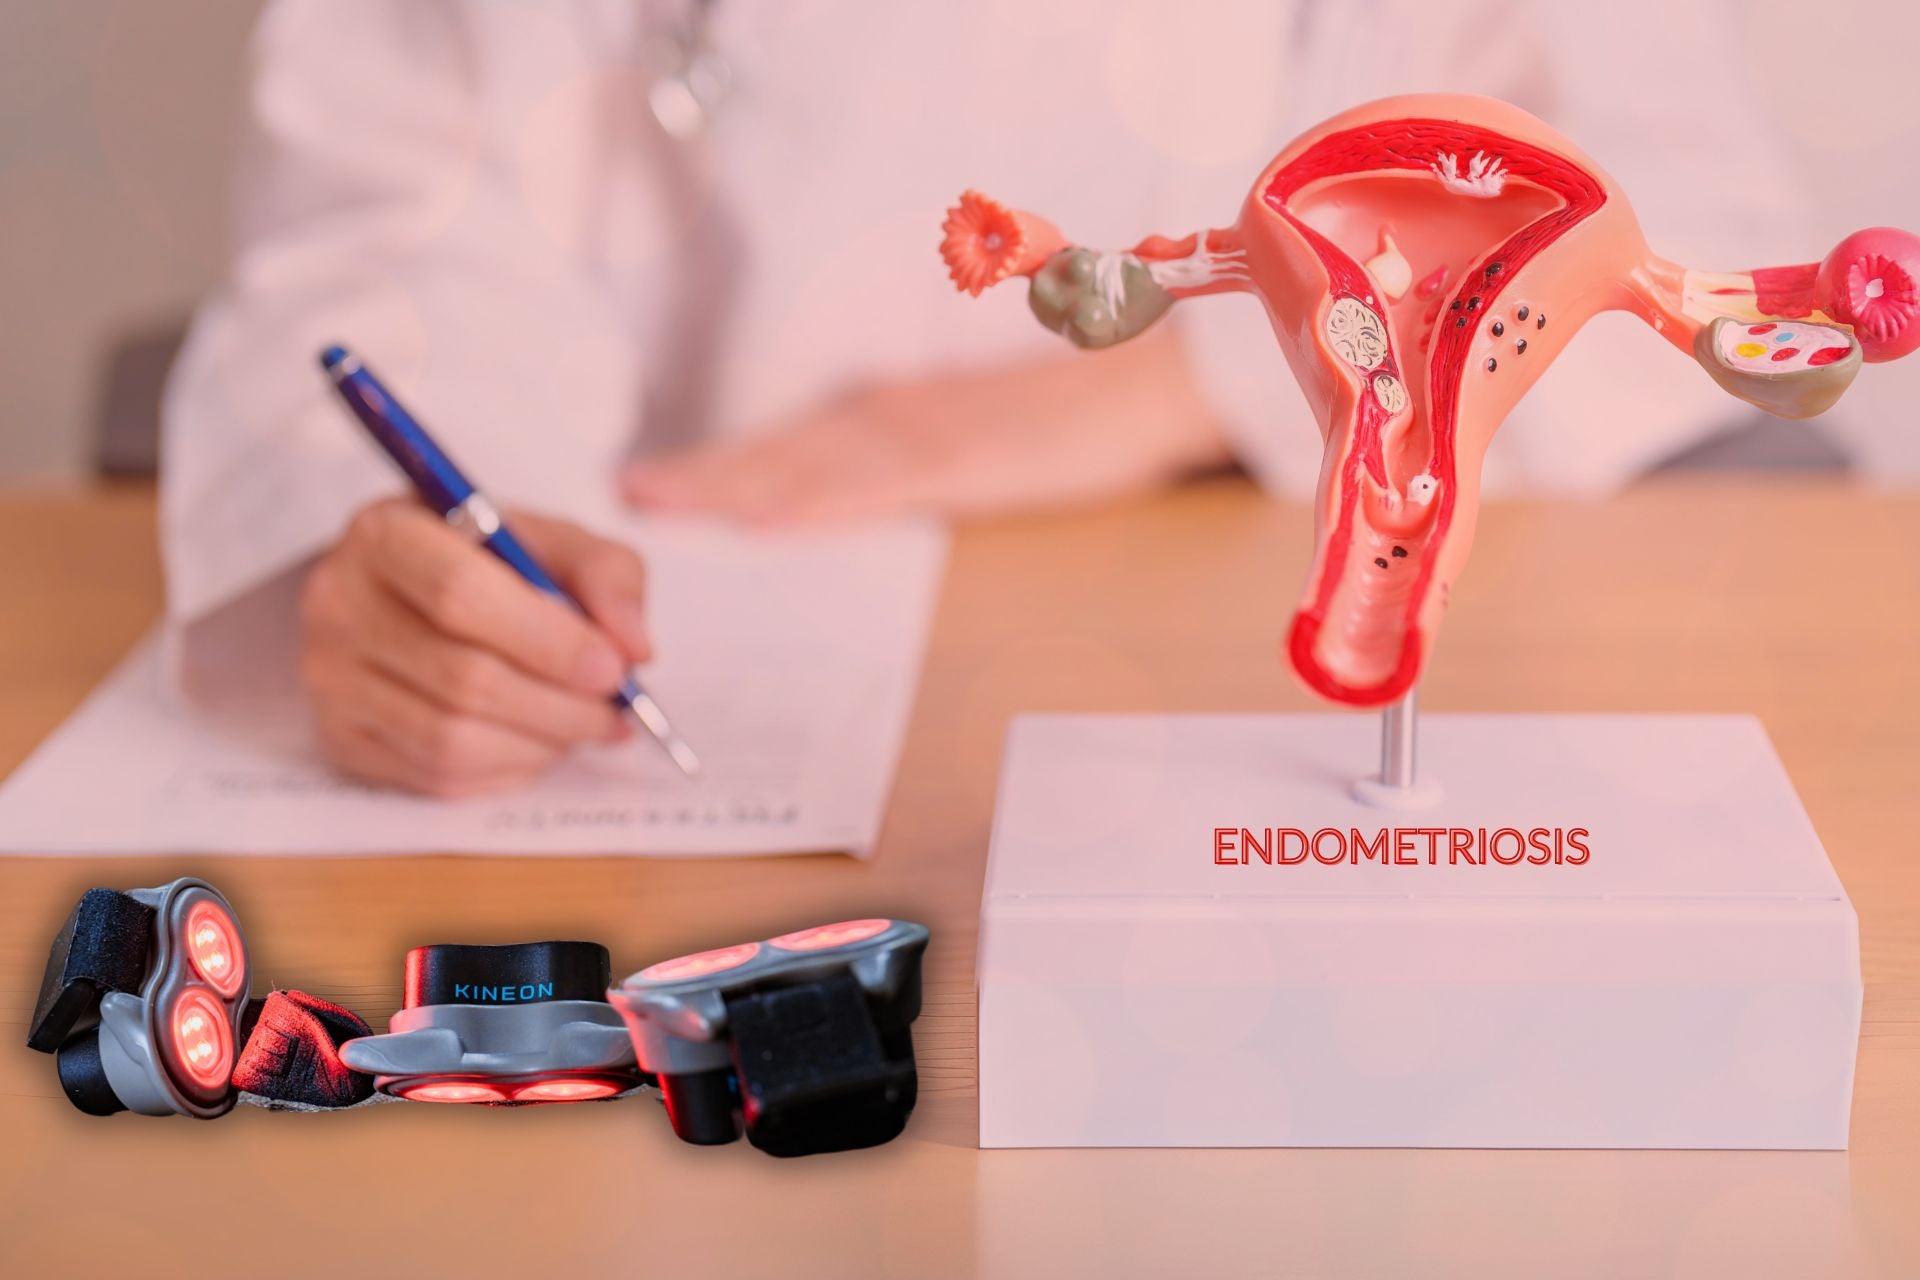 An image of an ovary model with a text that say ENDOMETRIOSIS and a Kineon Move+ Device.